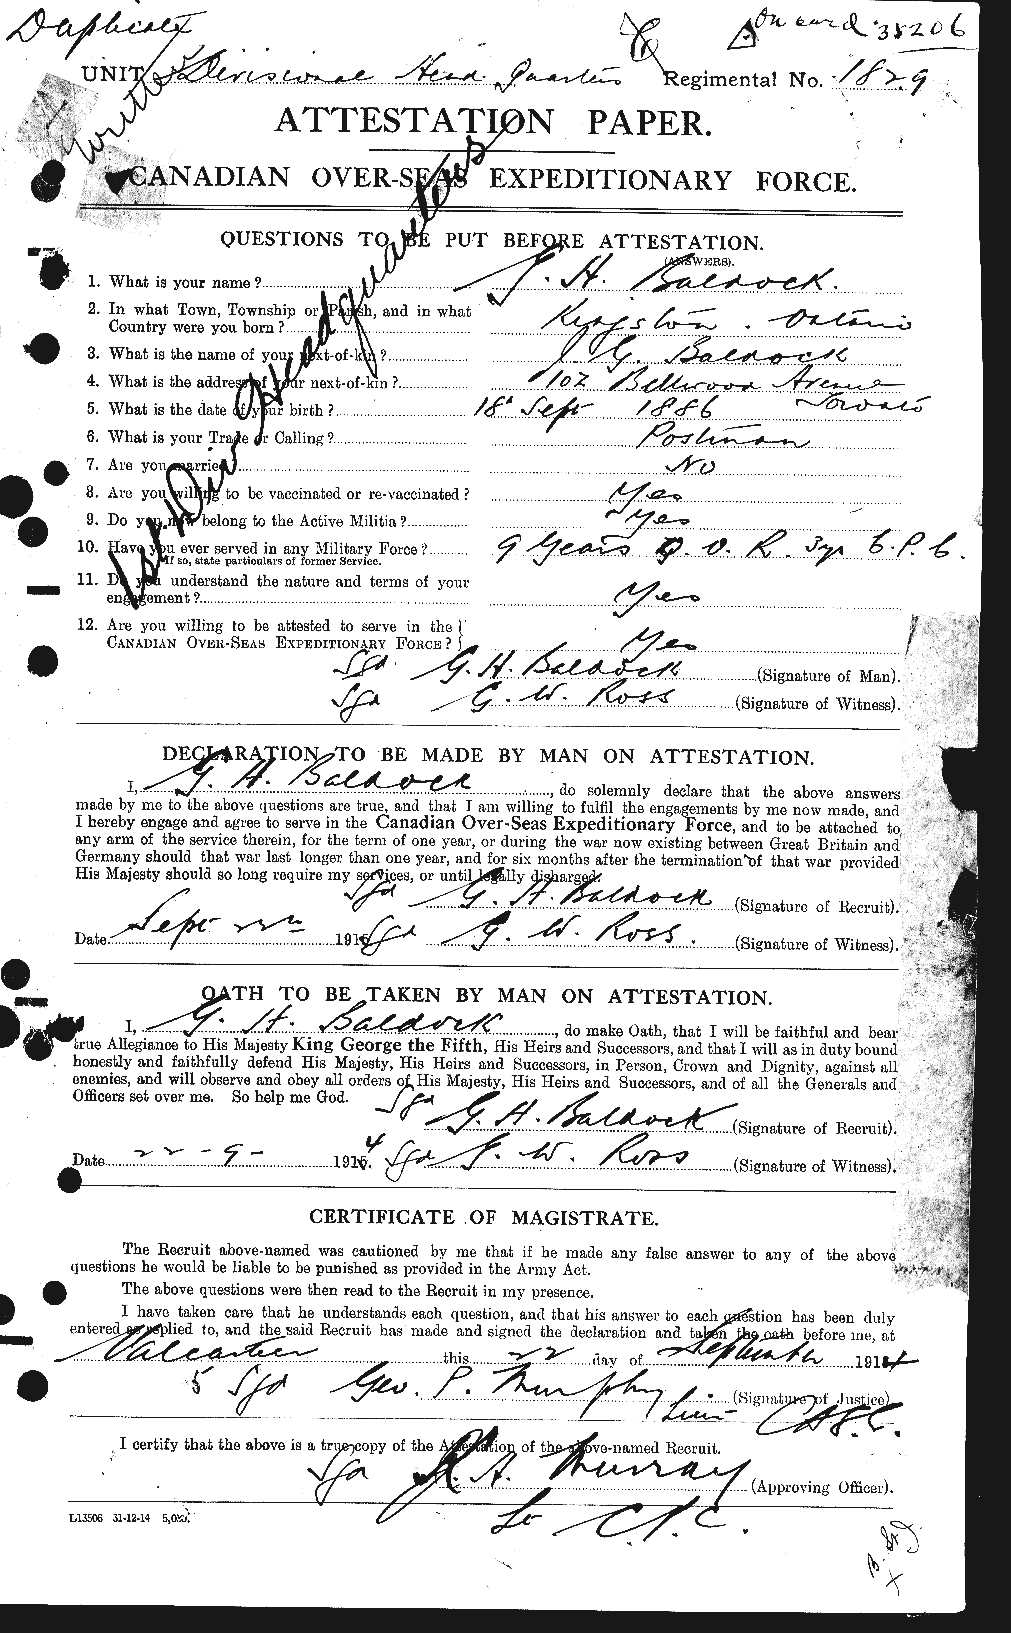 Personnel Records of the First World War - CEF 225375a